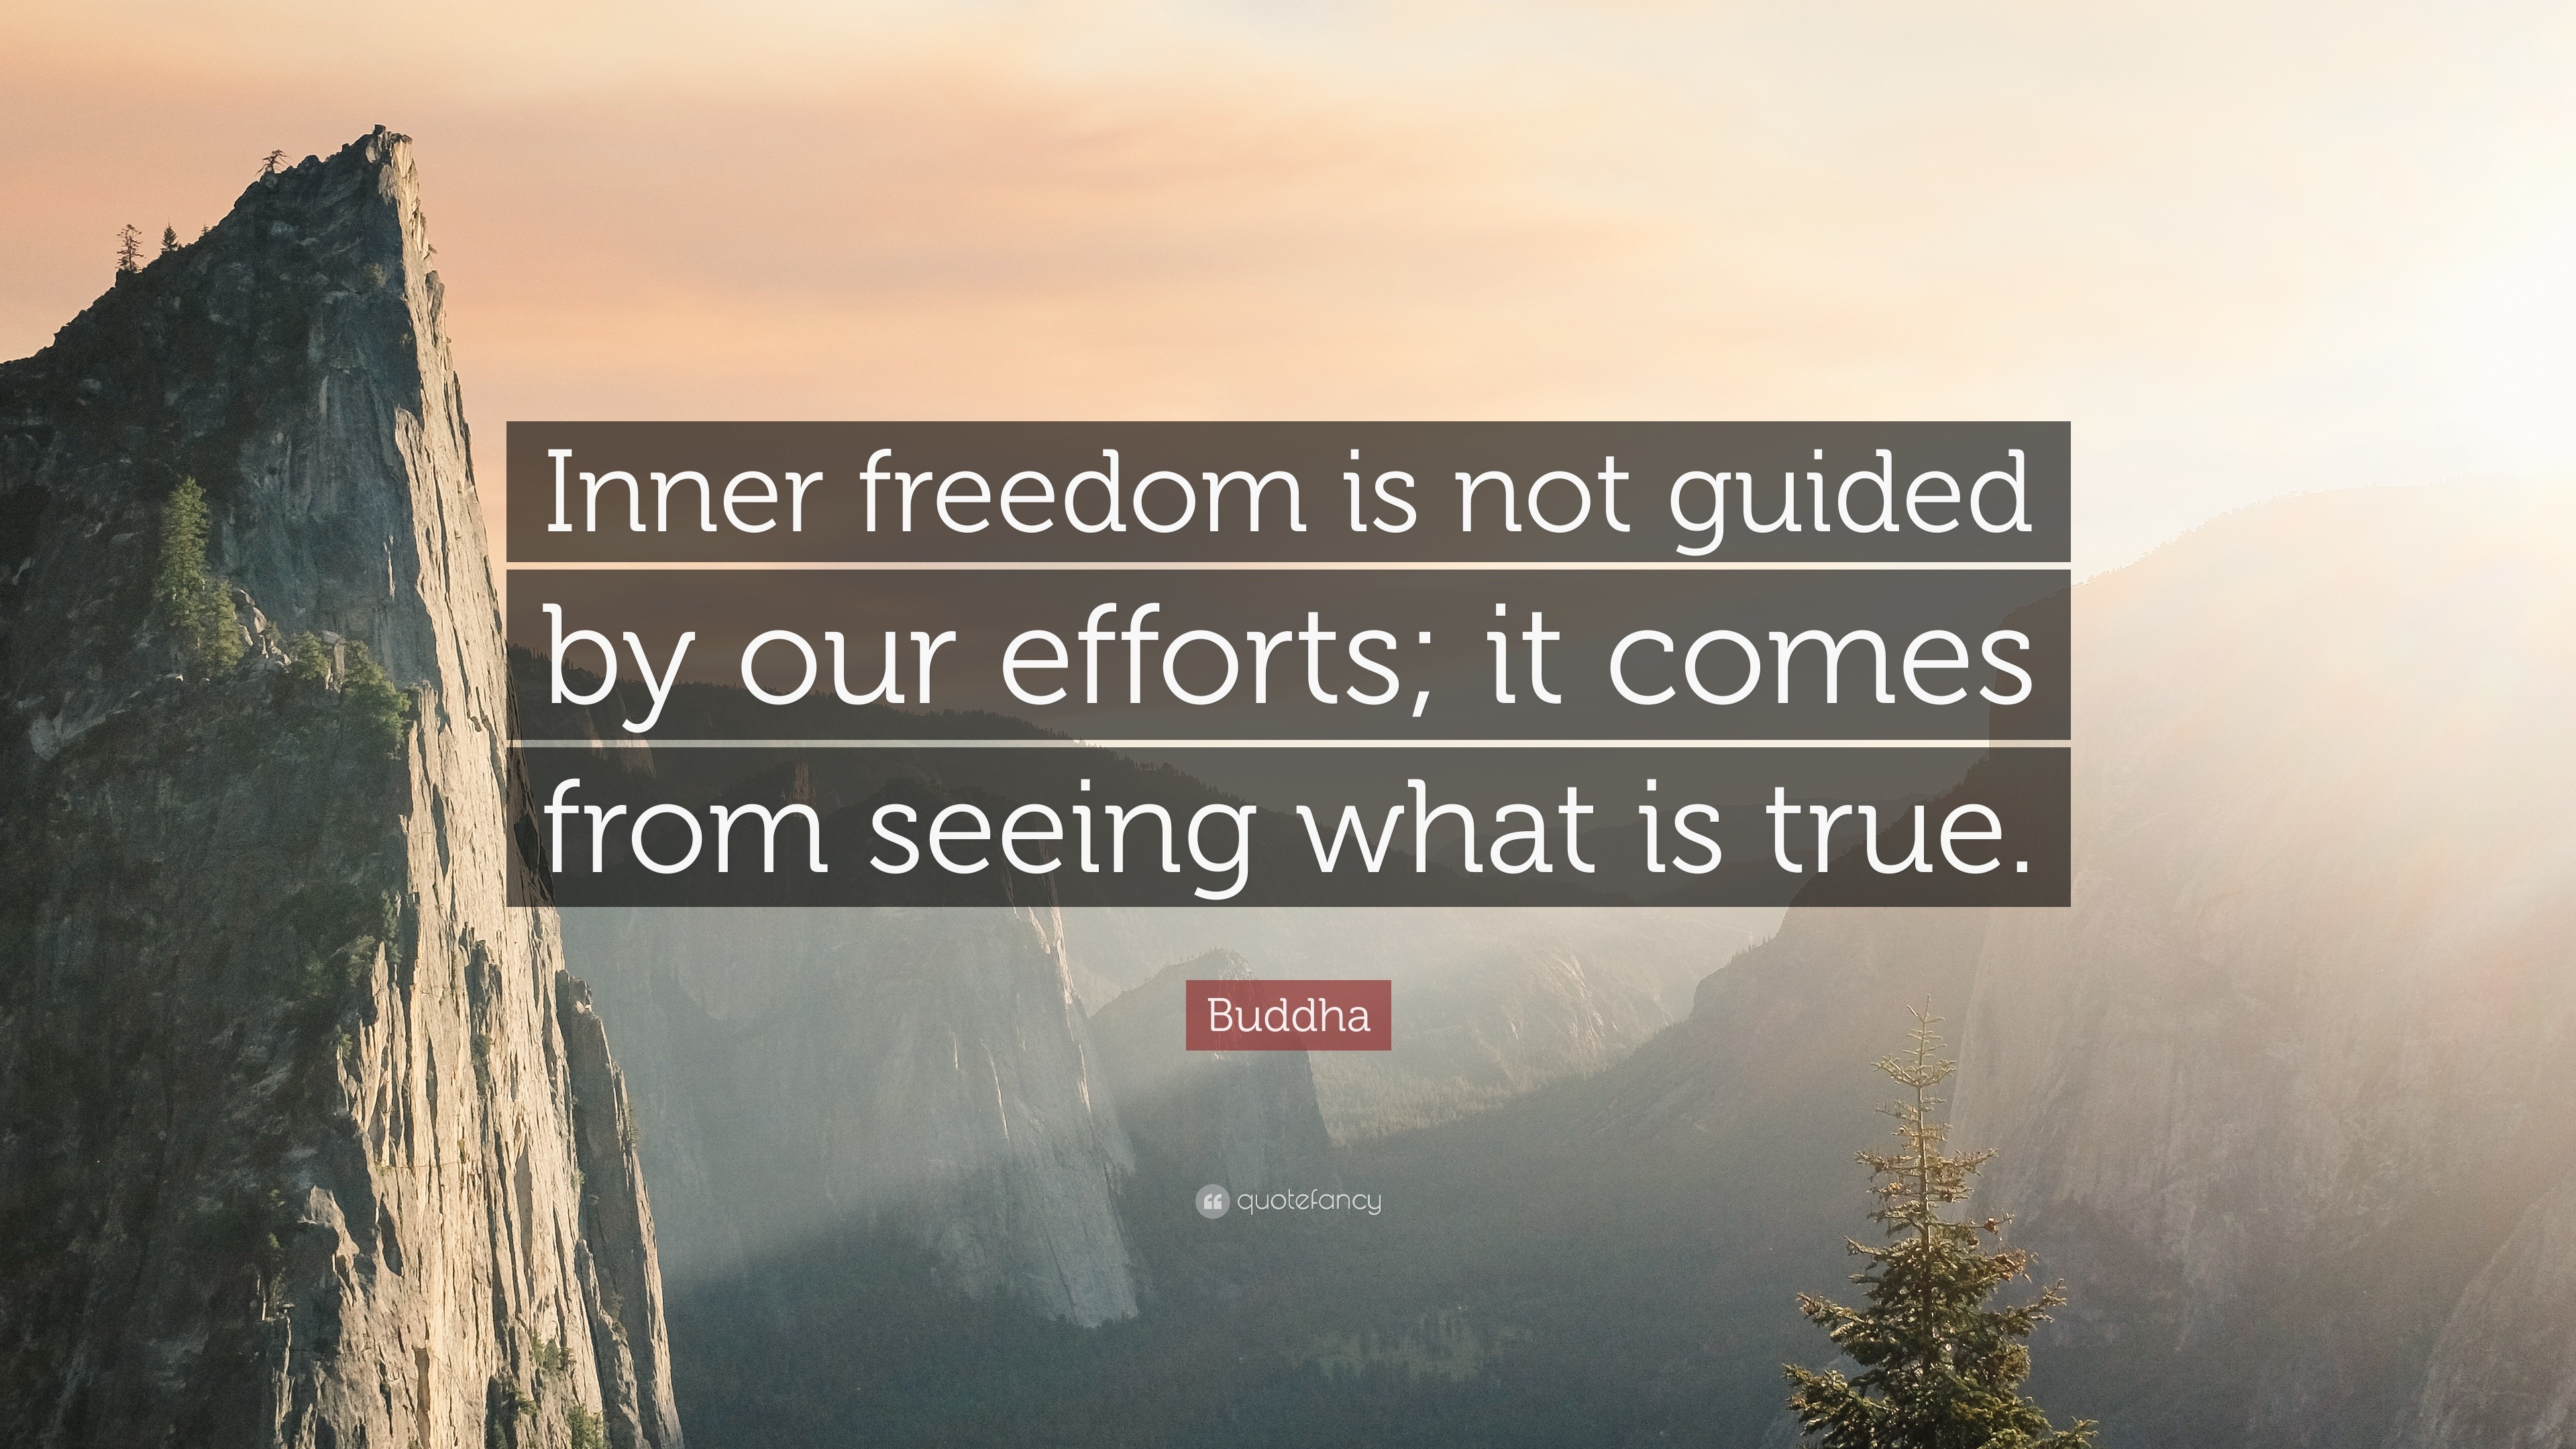 Buddha Quote: “Inner freedom is not guided by our efforts; it comes ...